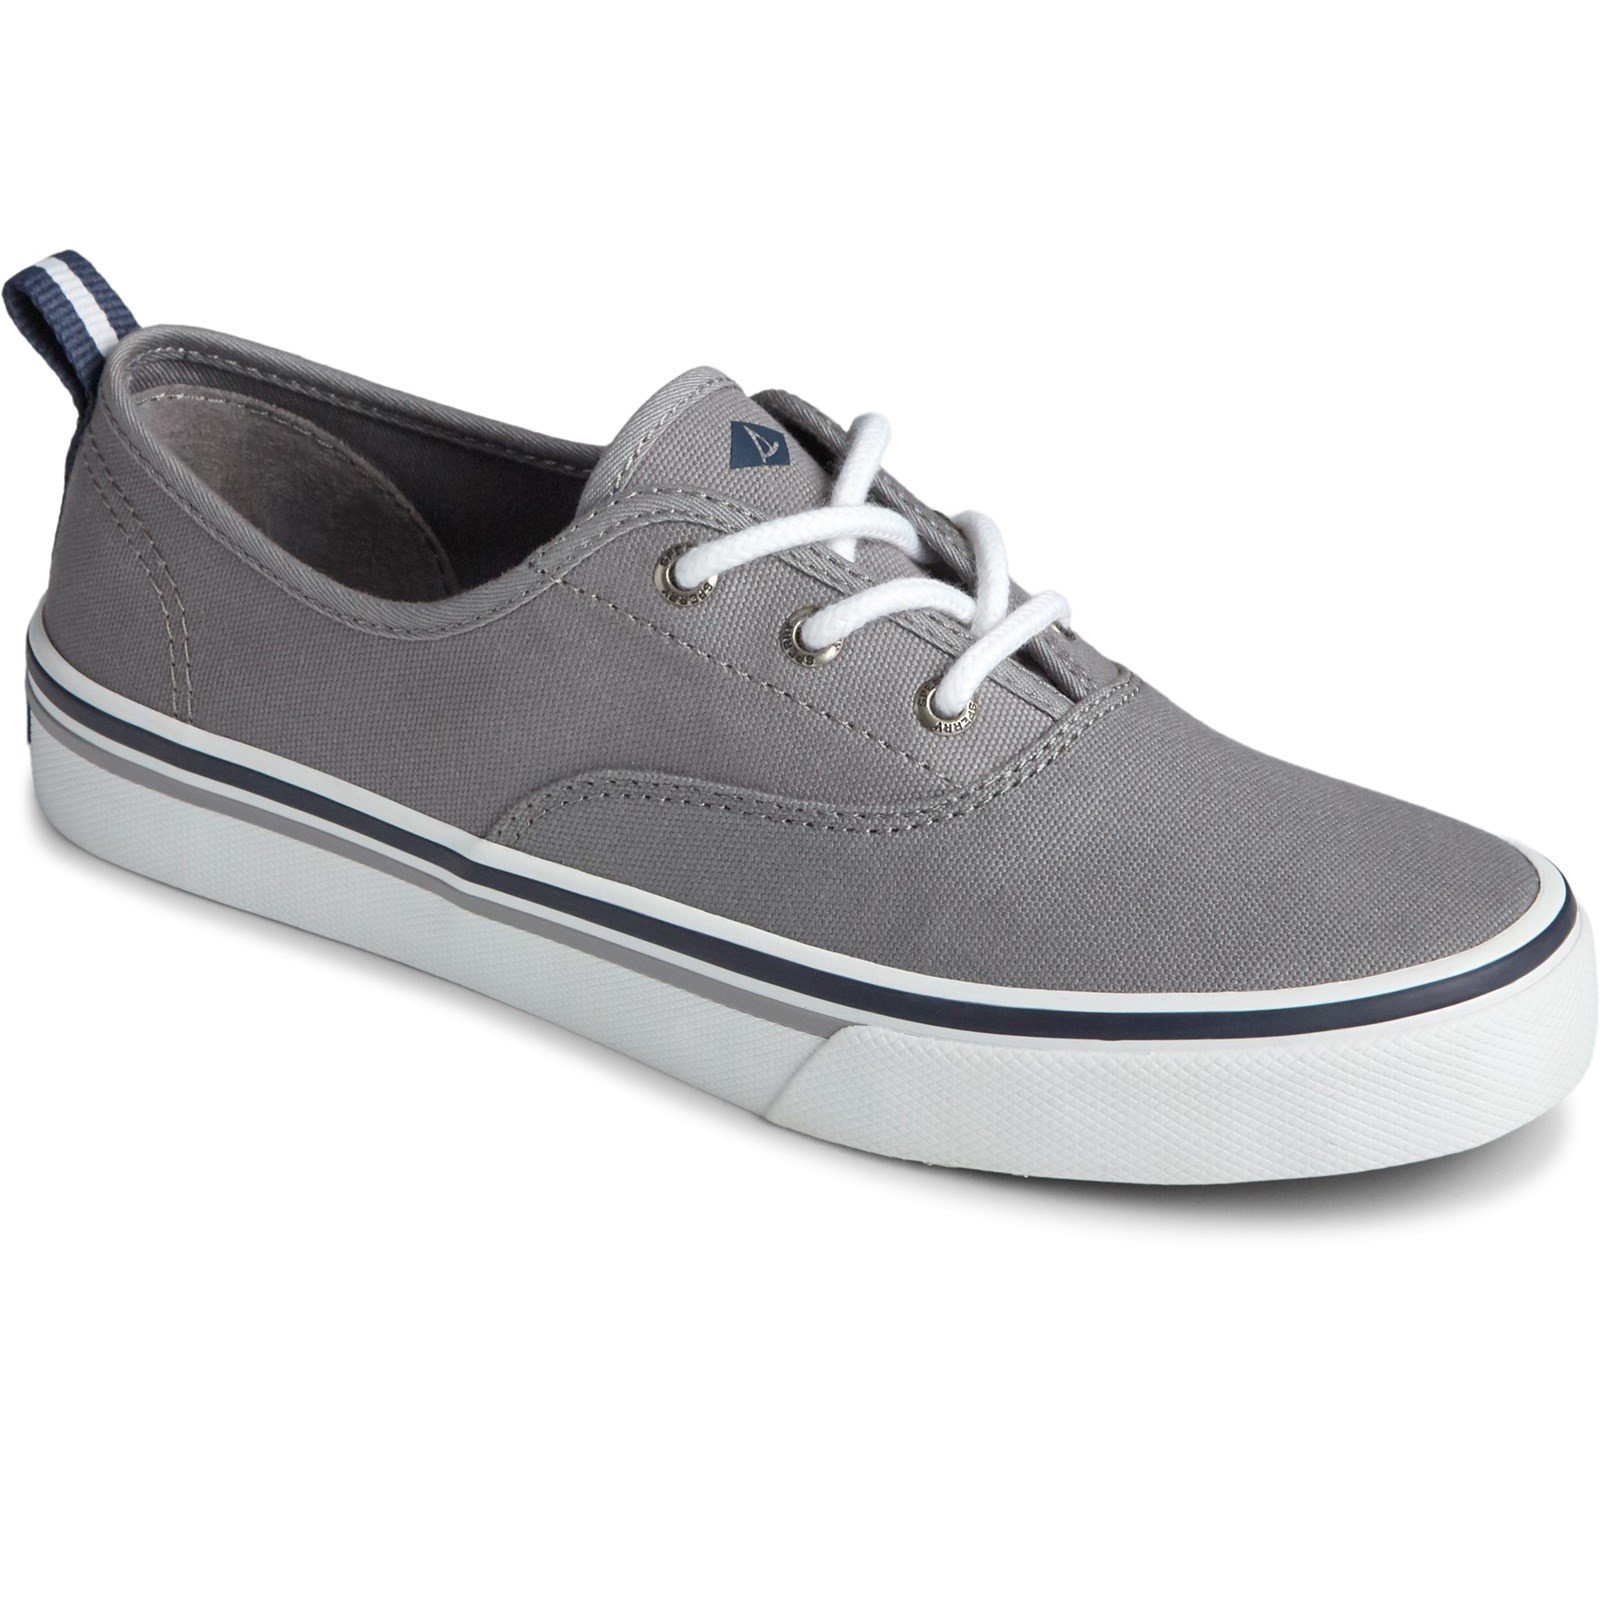 Sperry Women's Crest CVO Trainers Various Colours 32936 - Grey 4